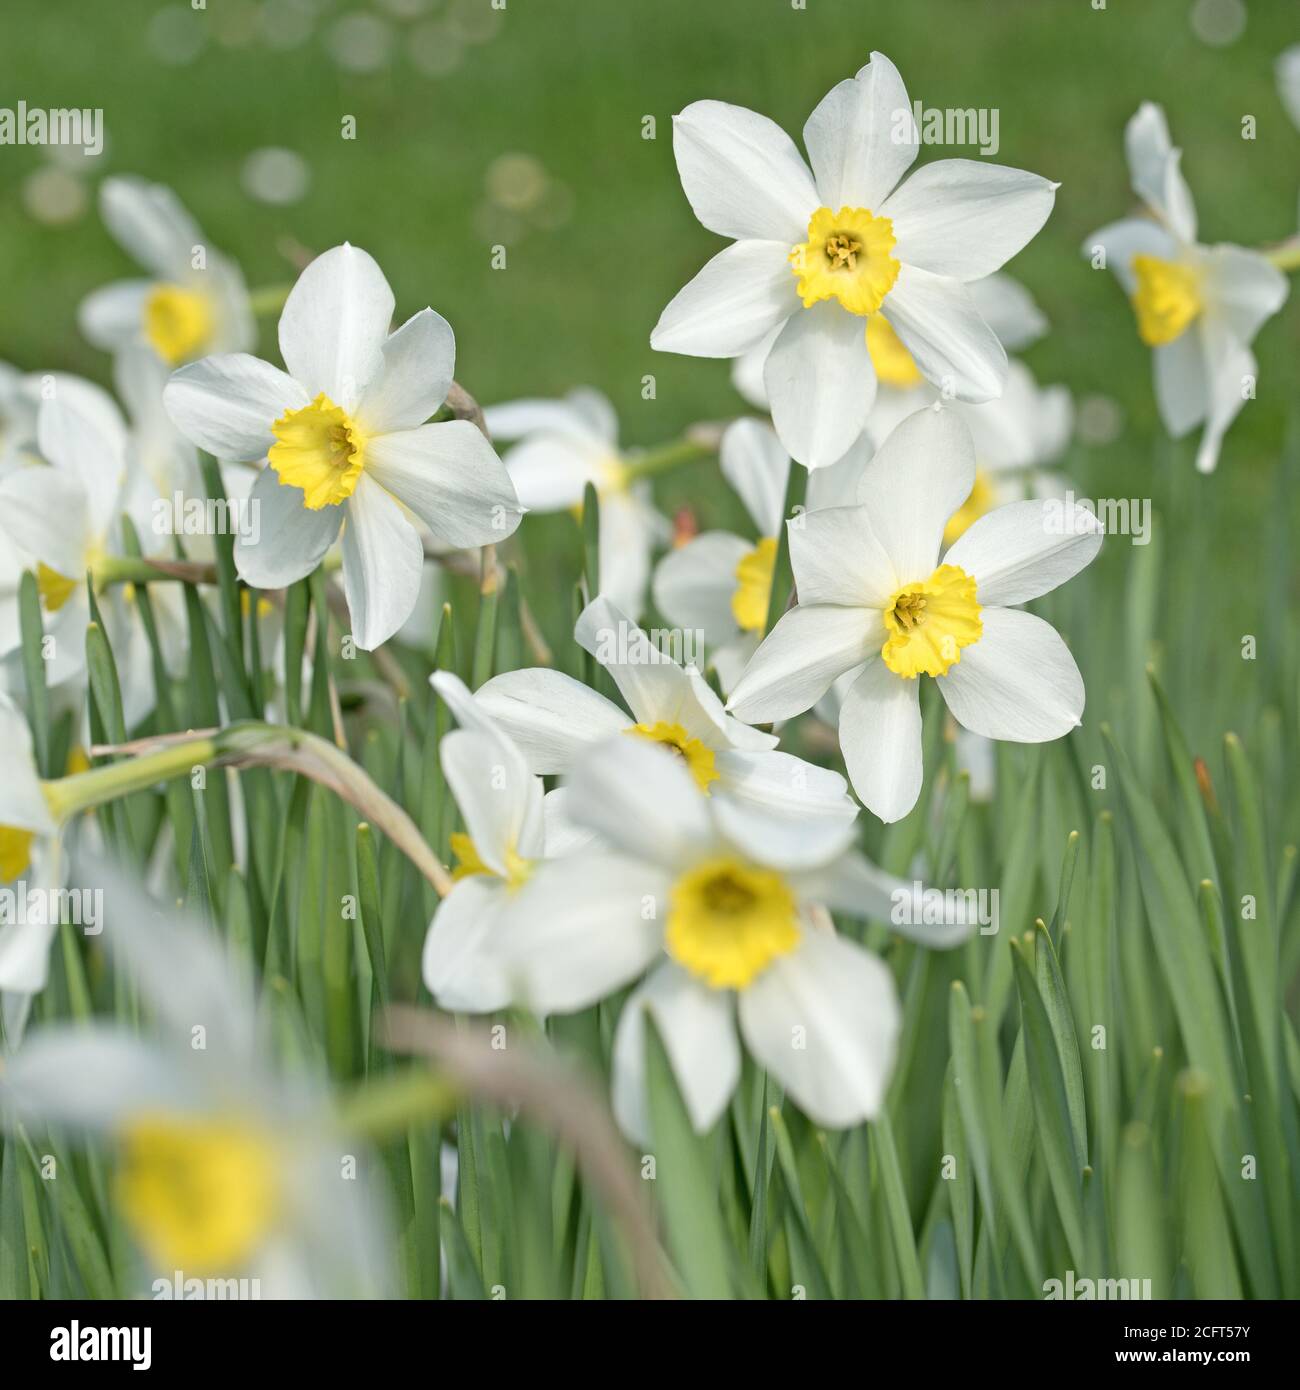 Blooming white daffodils in spring Stock Photo